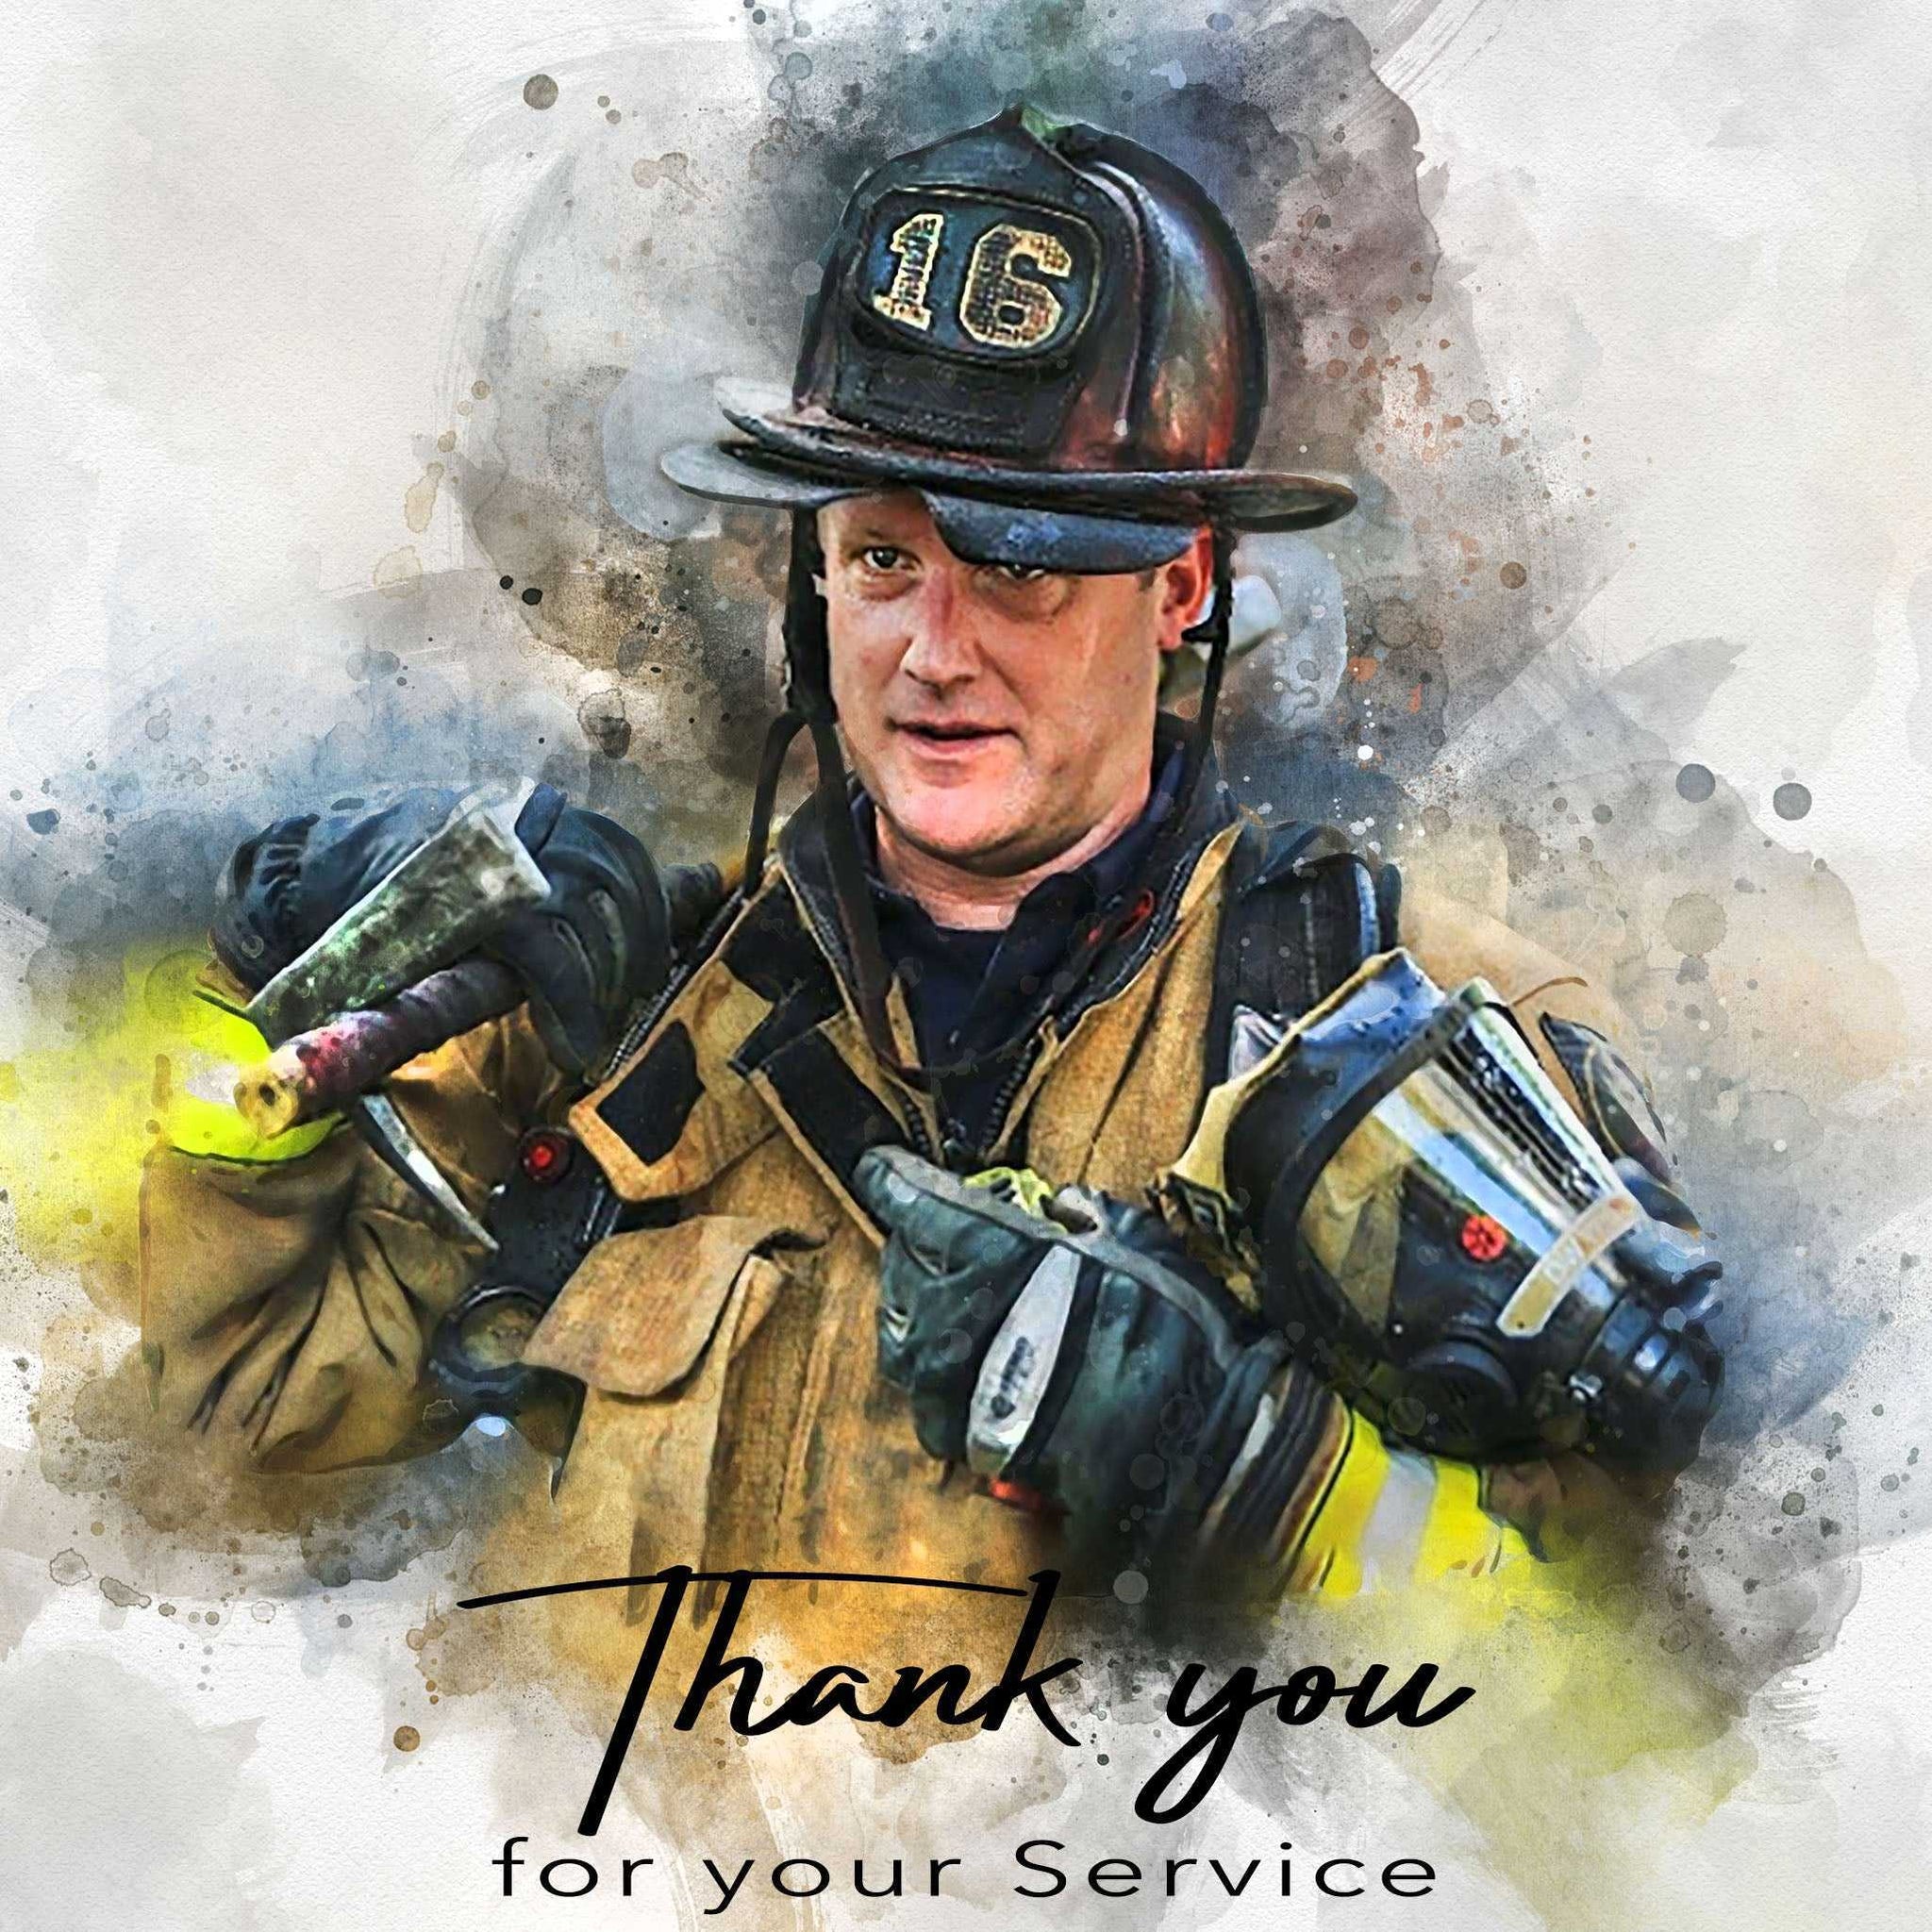 Firefighter Appreciation Day | Firefighter Gift | Fire Department Gifts | Firefighter Presents Ideas - FromPicToArt